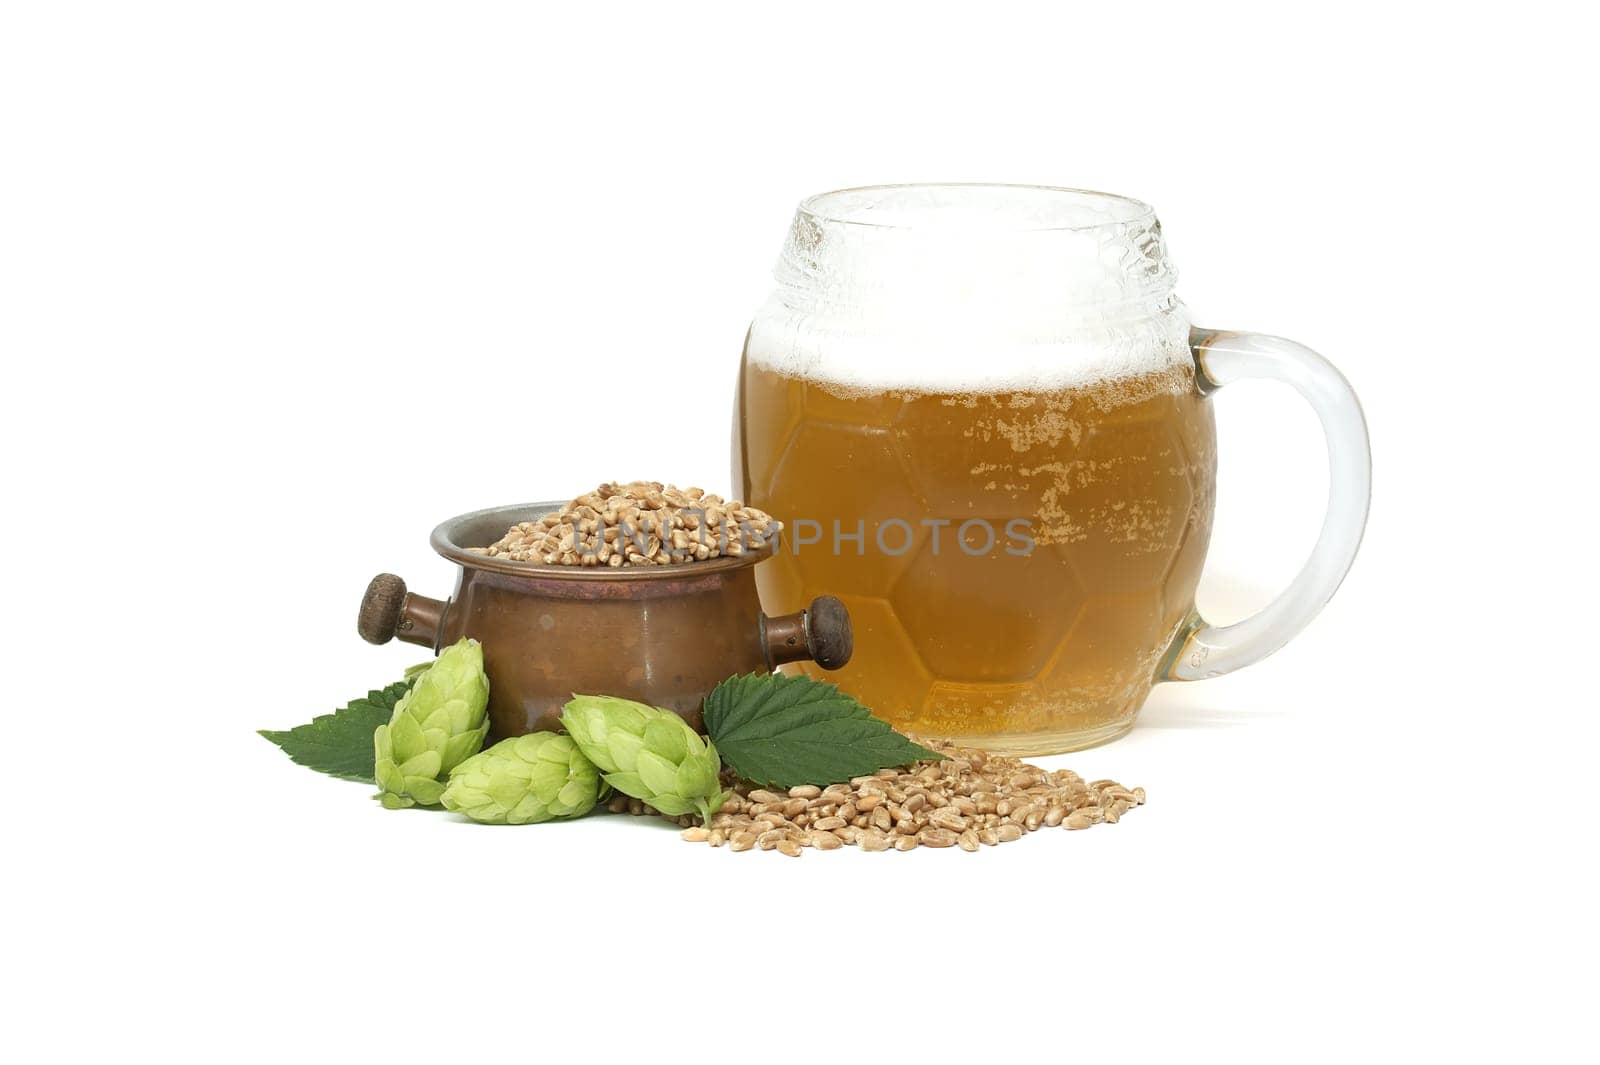 Fresh green hops cones and bucket filled with grains near glass mug filled with a beer isolated on white background, beer brewing ingredients